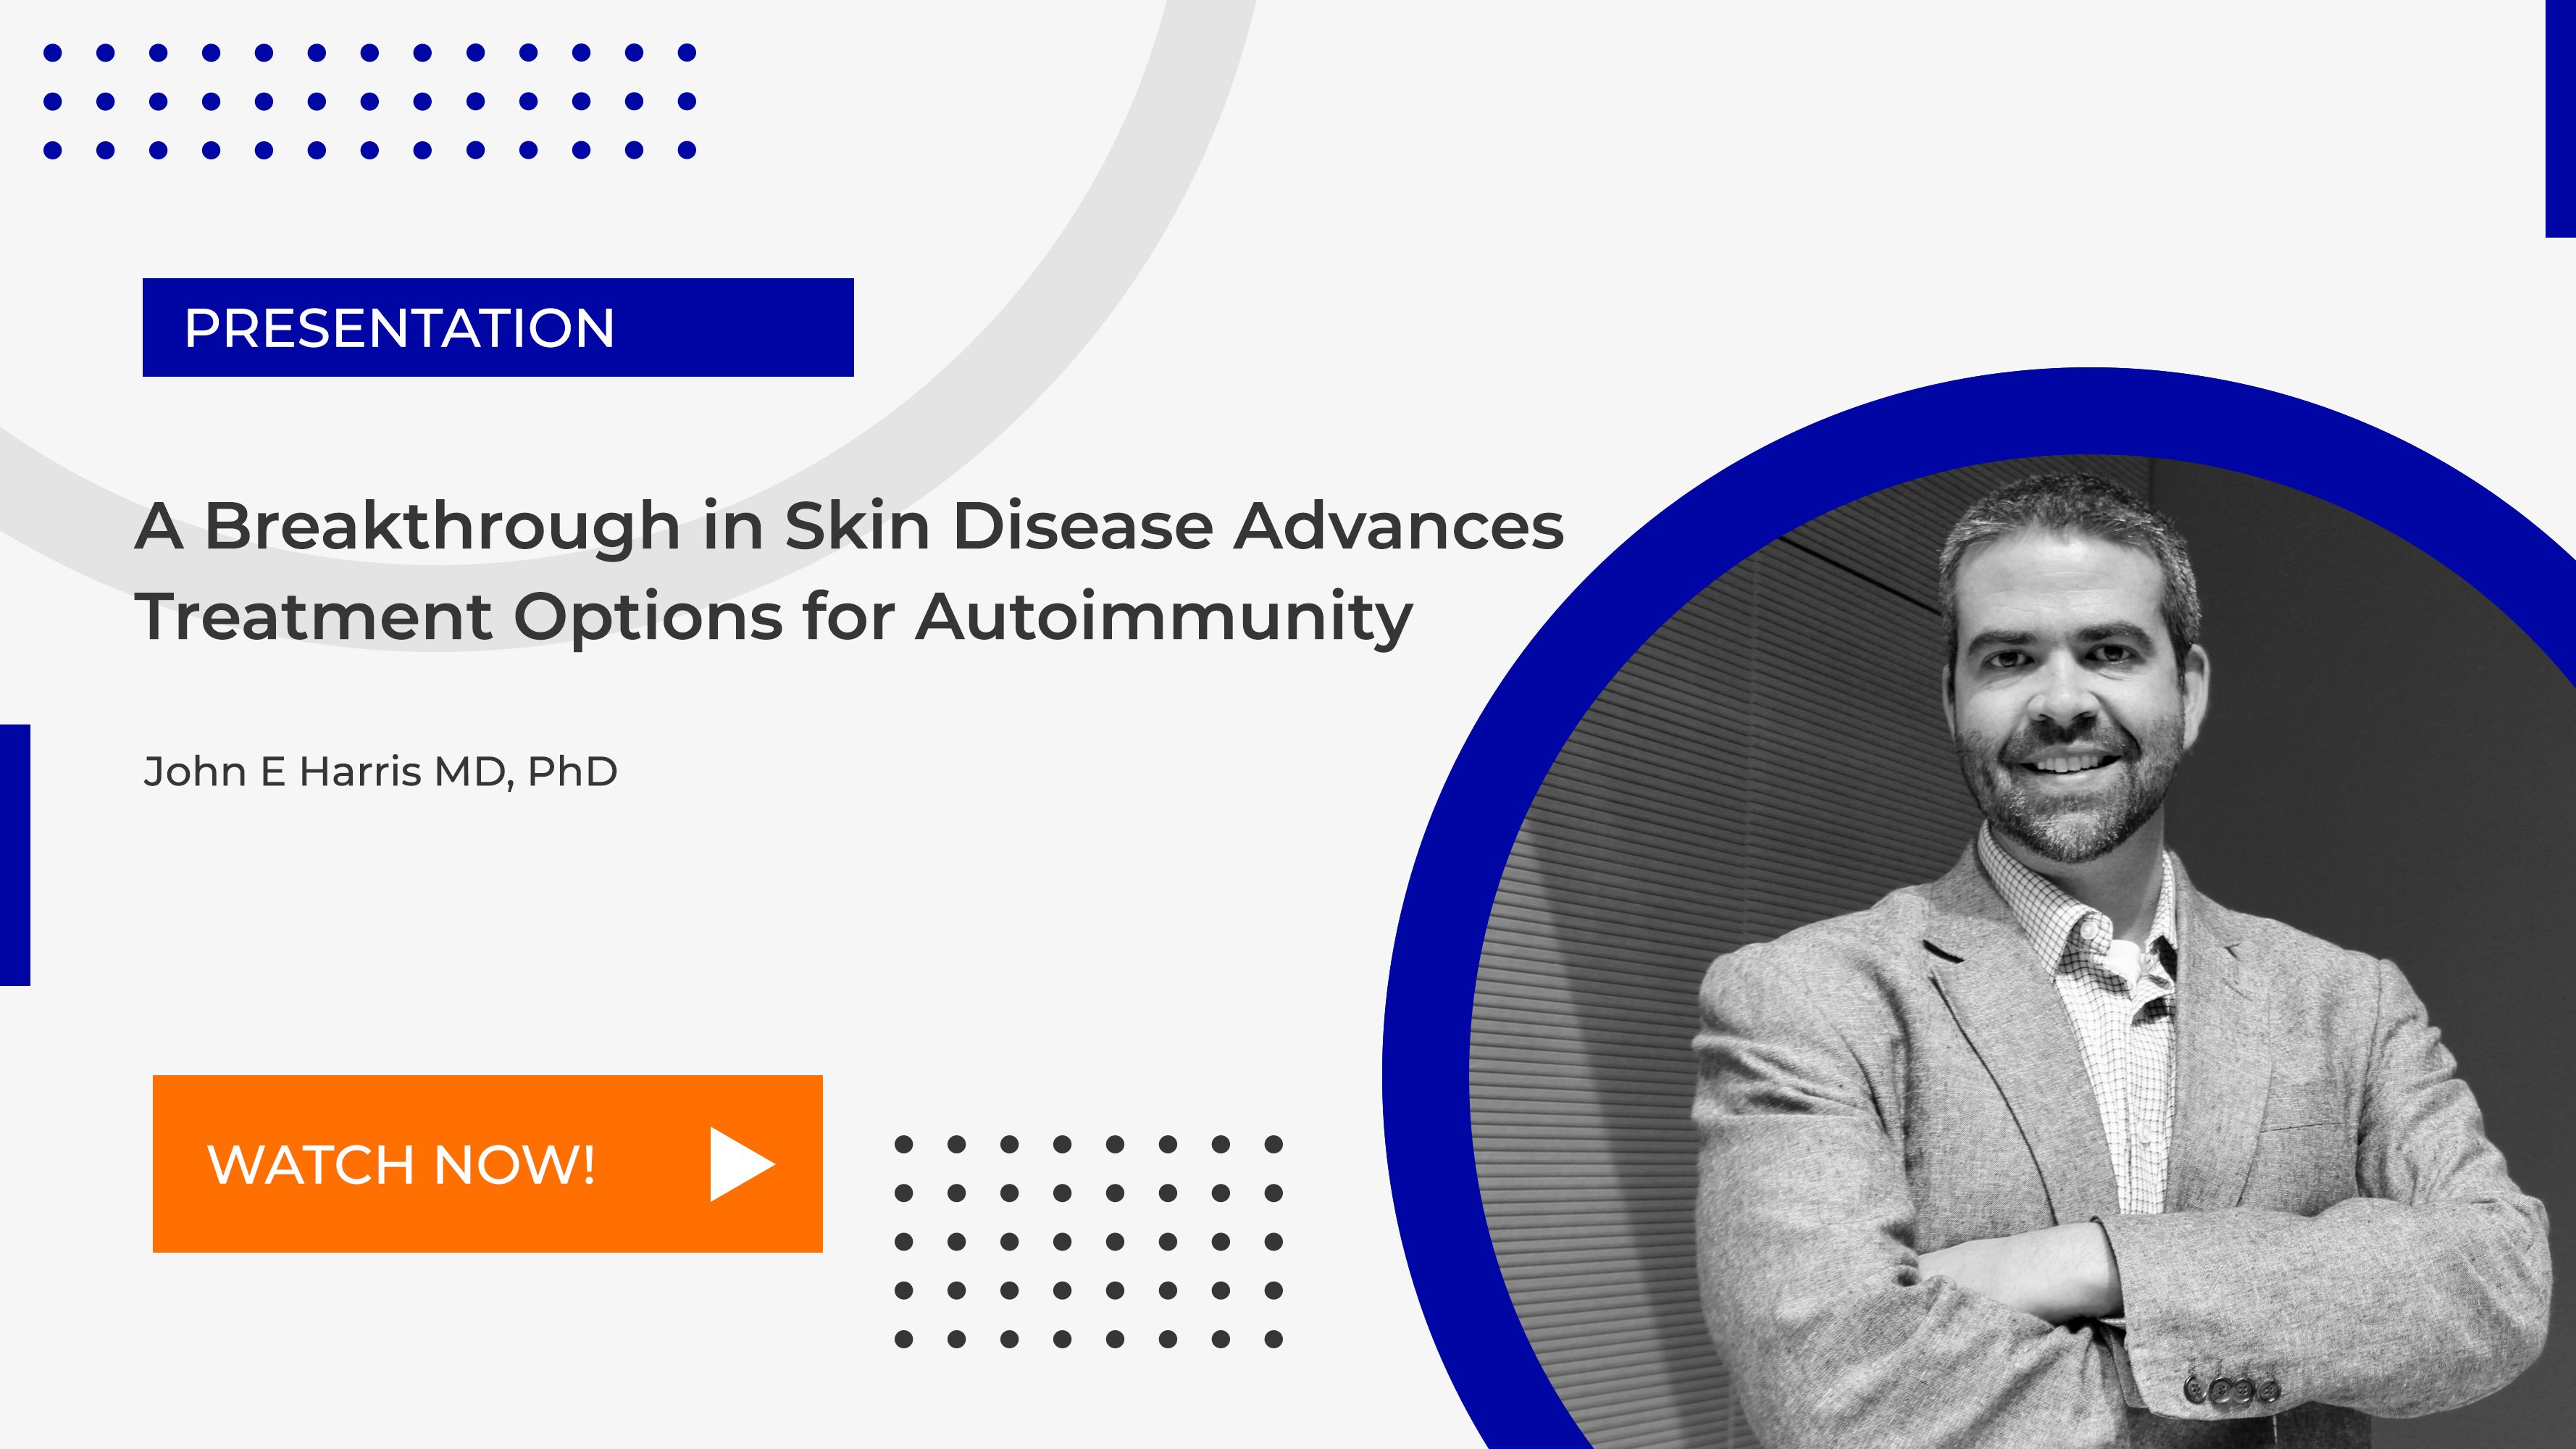 Presentation: A Breakthrough in Skin Disease Advances: Treatment Options for Autoimmunity" by John E Harris MD, PhD. There is a button below the text that says "WATCH NOW!